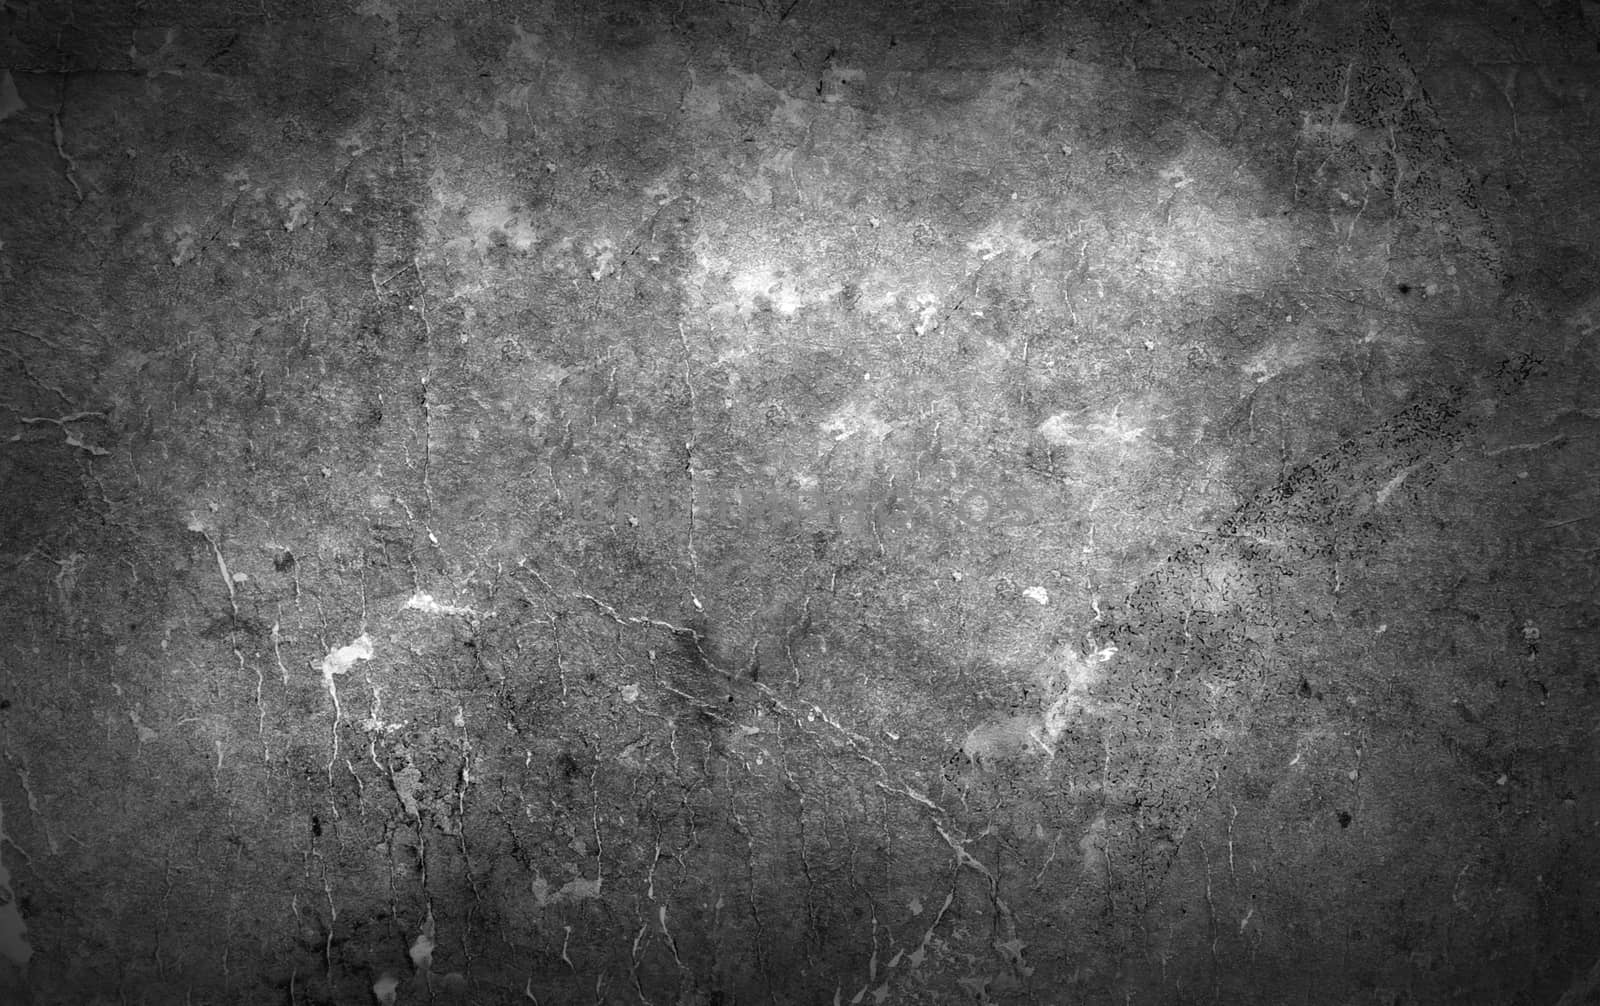 grunge paper background with space for text or image